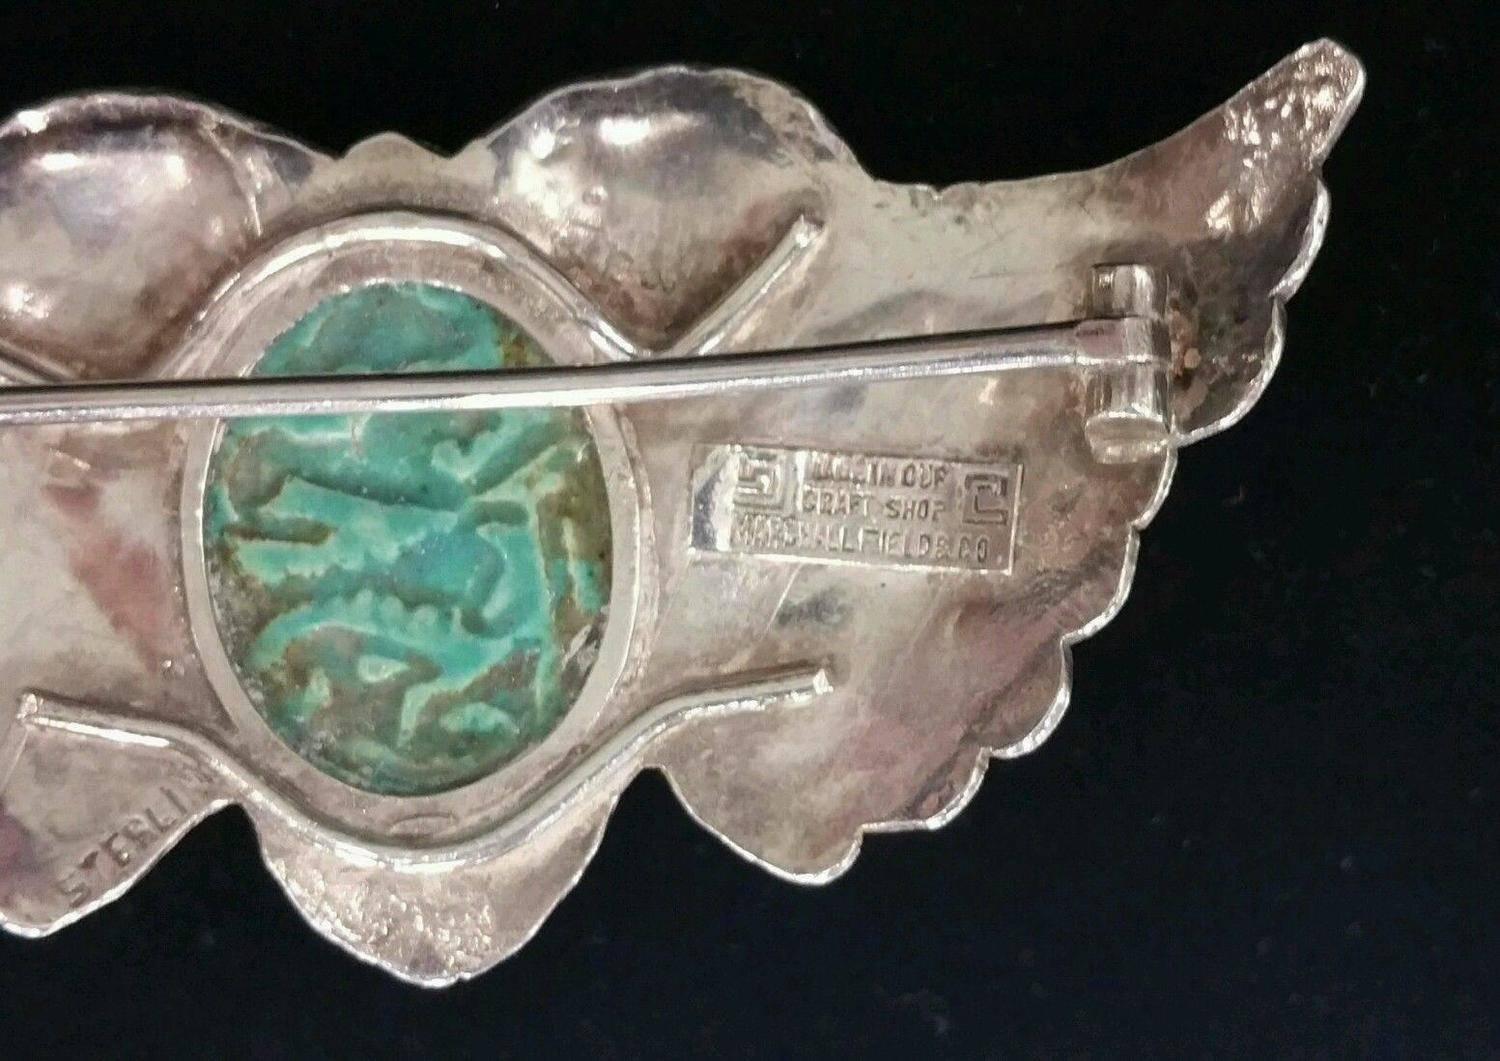 Being offered is an exceedingly rare circa 1915 sterling silver pin by Marshall Field of Chicago, Illinois. Incredible pin comprising a handwrought winged design; at the center, an intricately carved scarab. Dimensions : 3 1/4 inches x 1 3/4 inches.